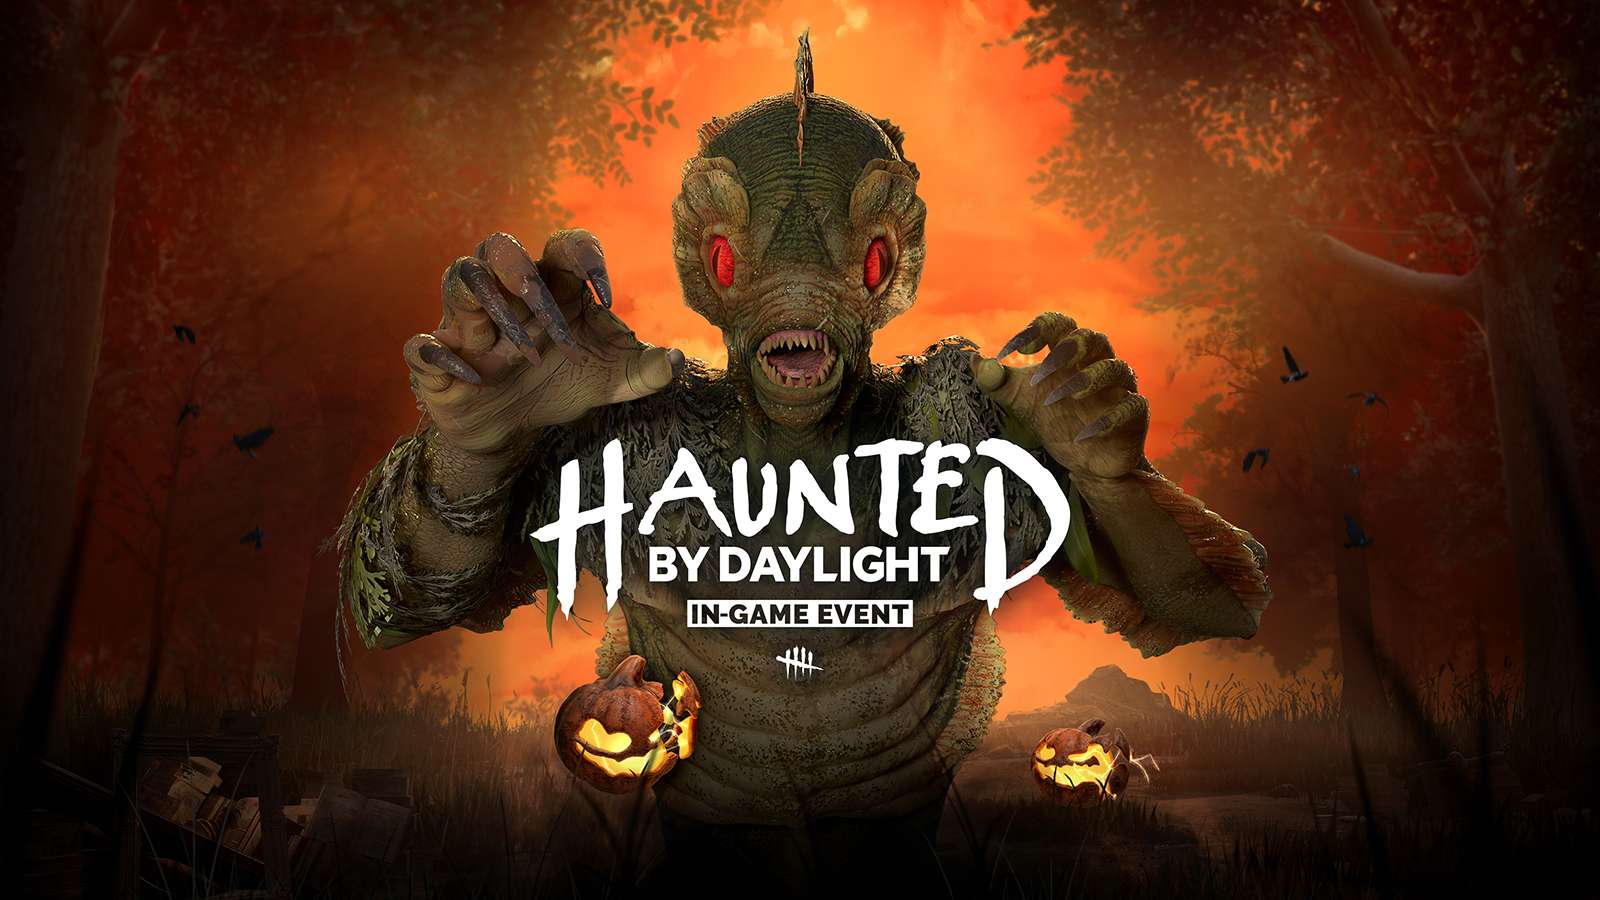 Key art for Dead by Daylight's Halloween 2022 event, Haunted by Daylight